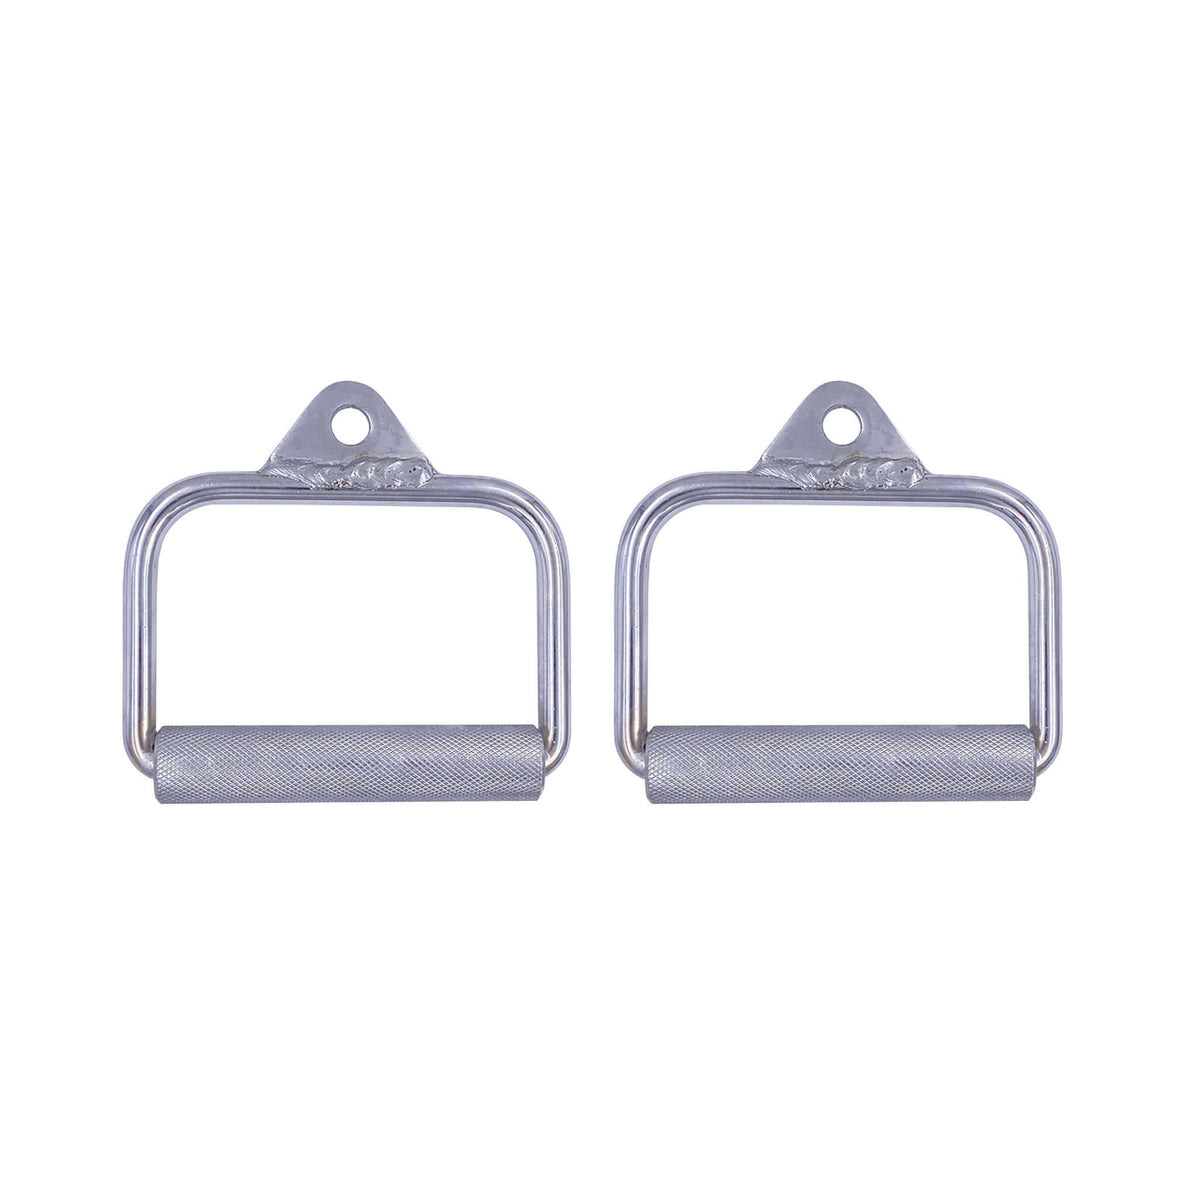 Pair of Steel Stirrup D Handles Cable Attachment | INSOURCE